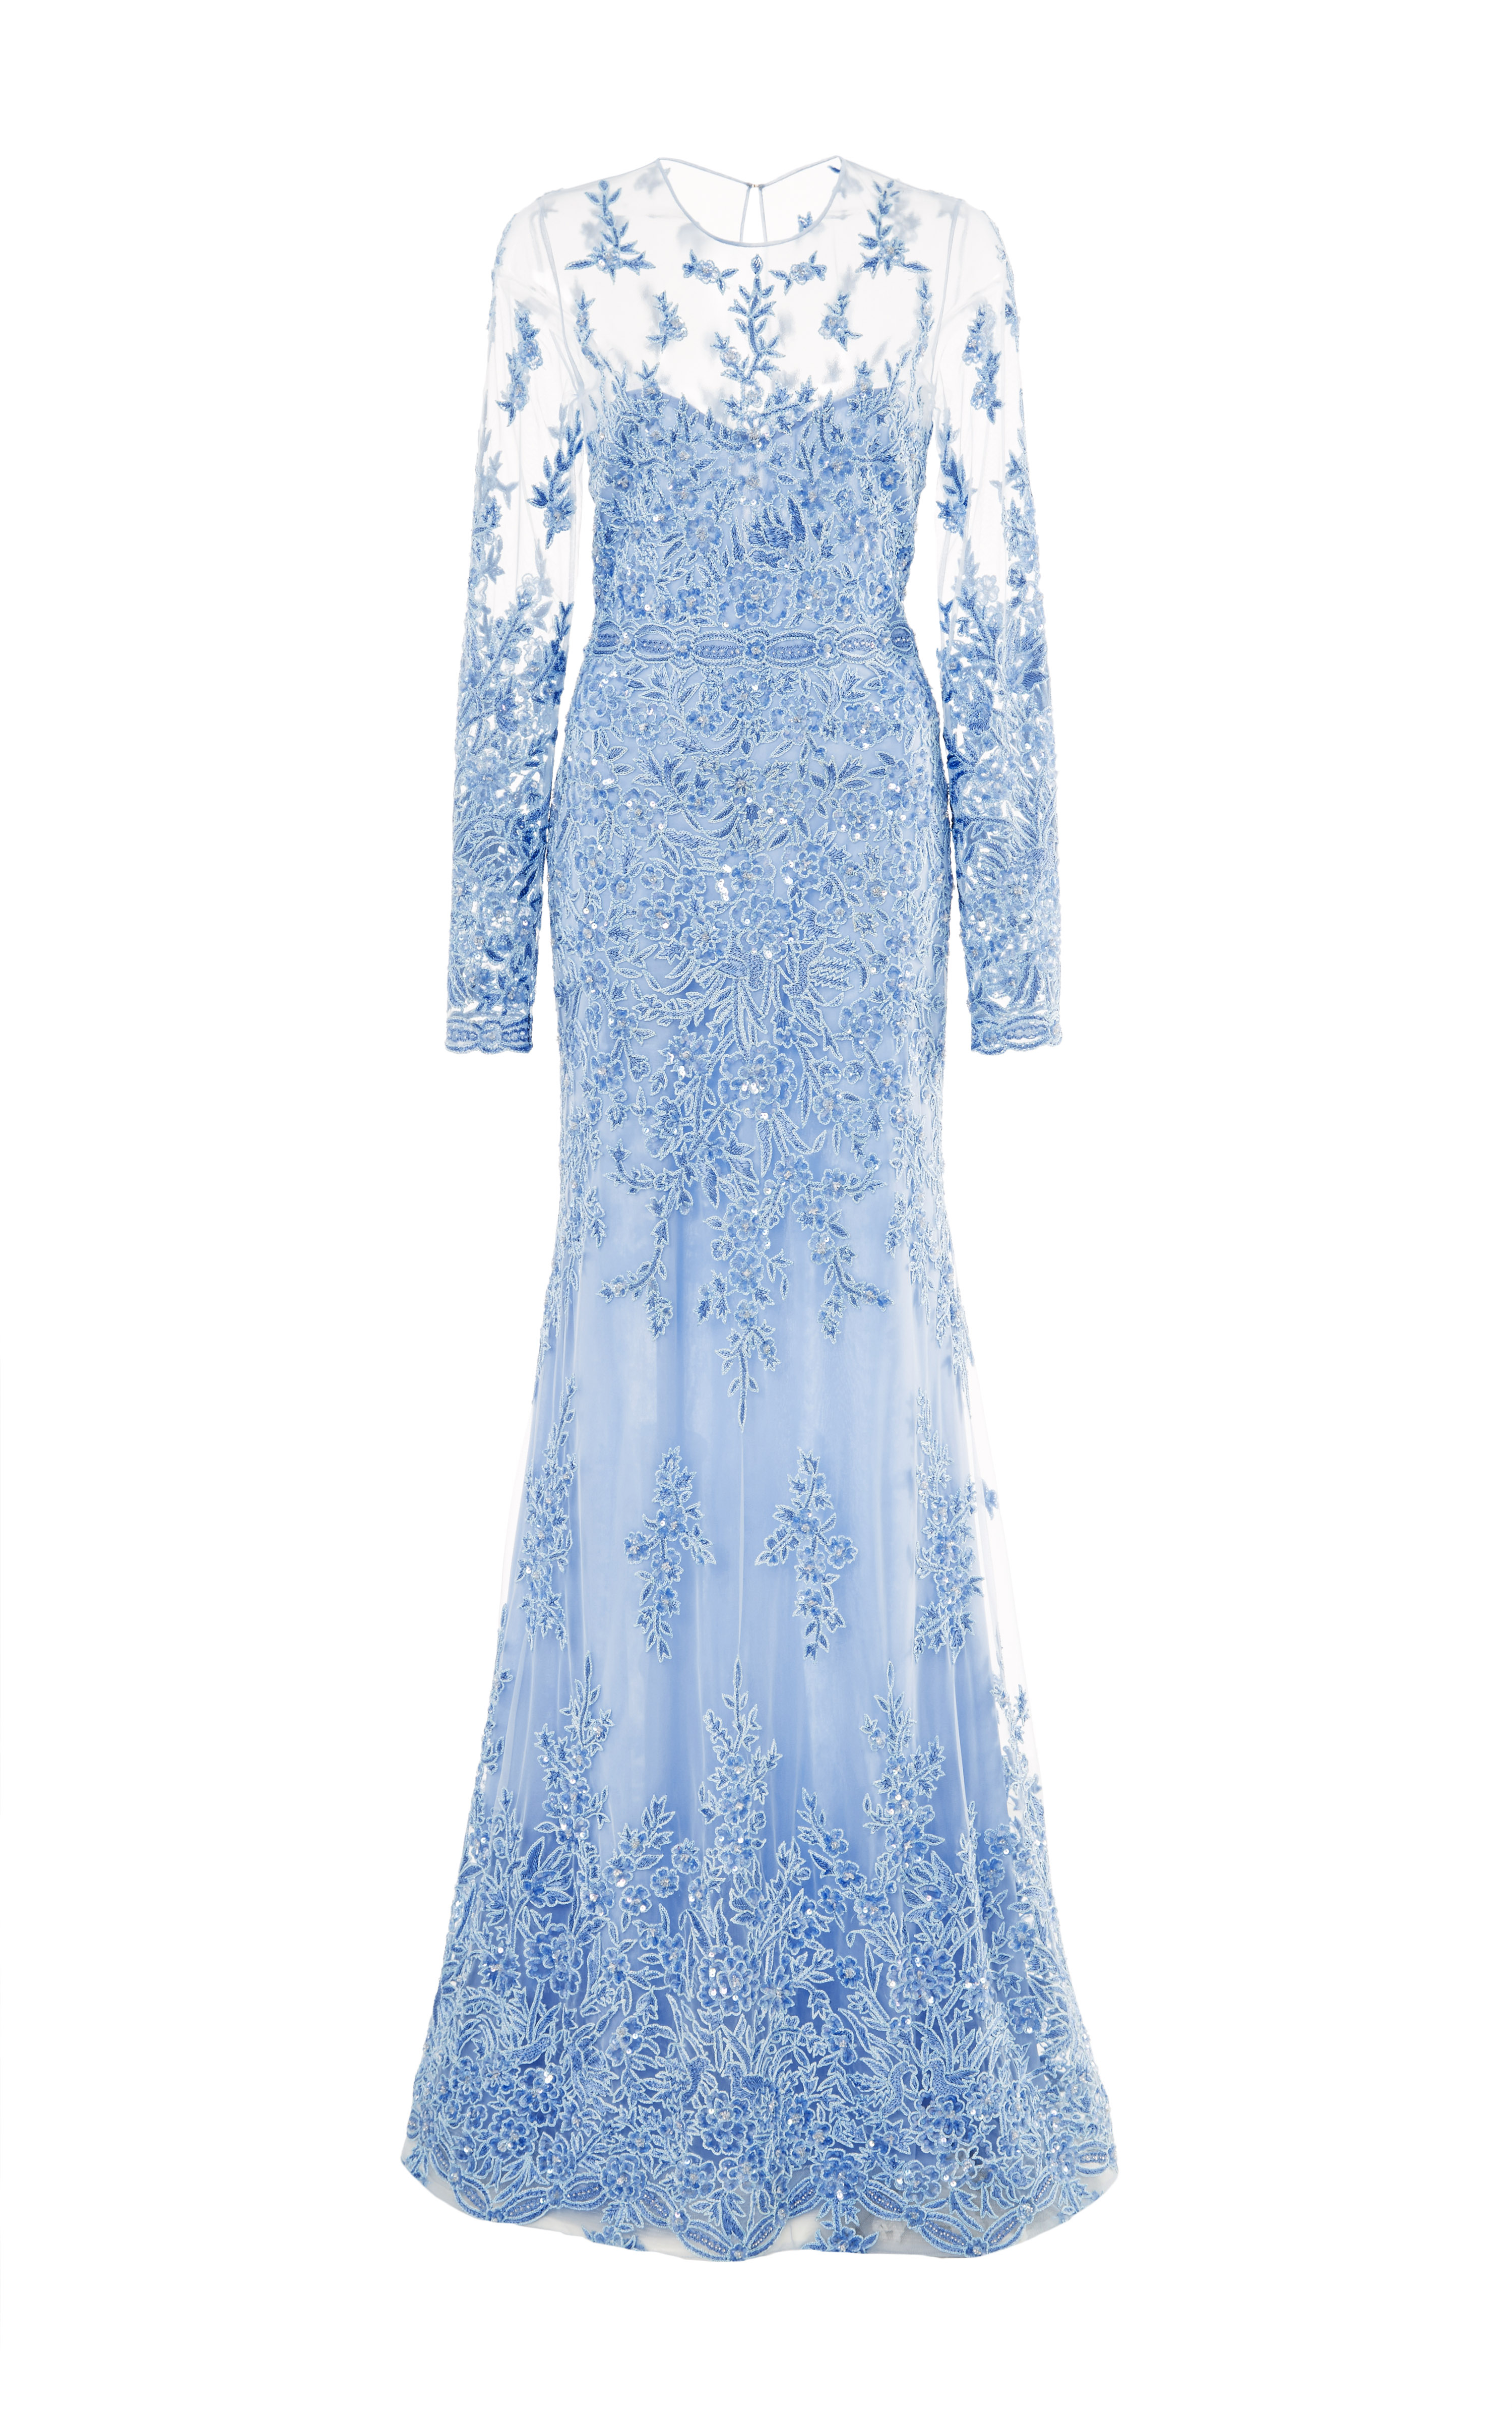 Lyst - Naeem Khan Lace Embroidered Gown in Blue